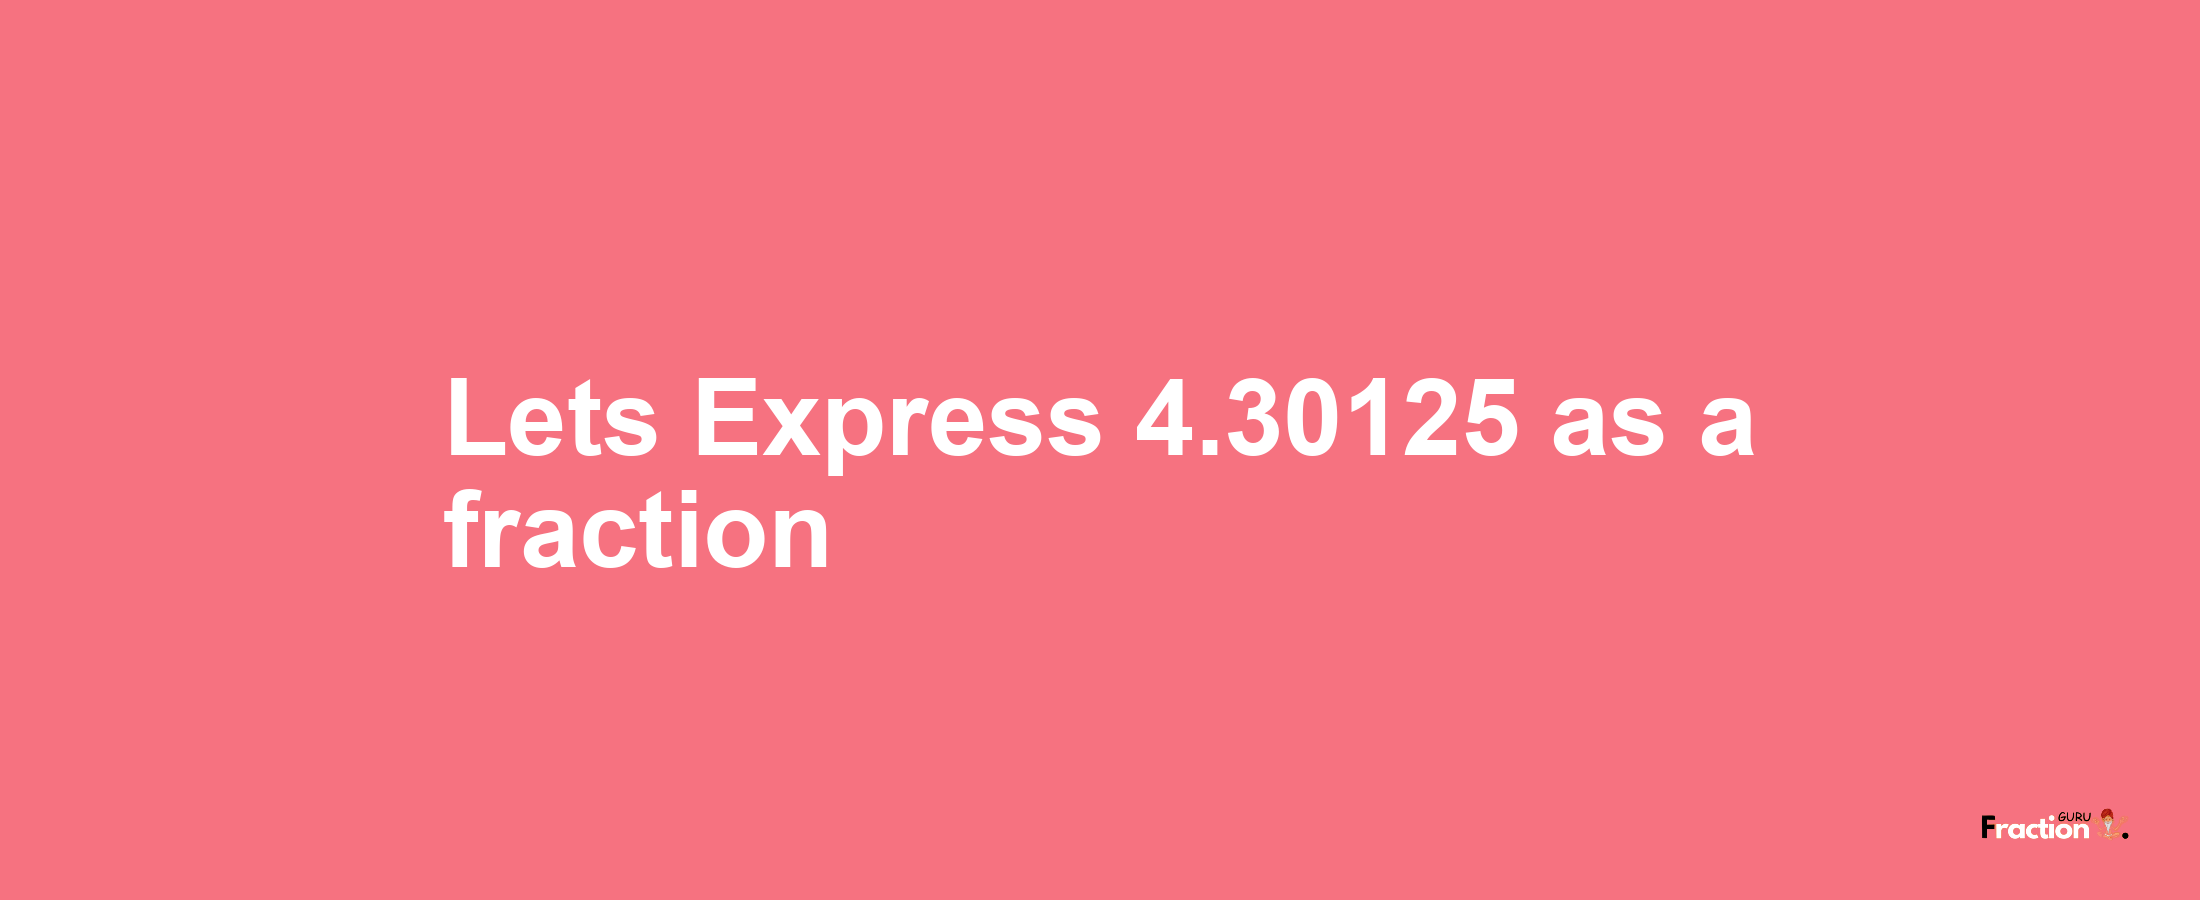 Lets Express 4.30125 as afraction